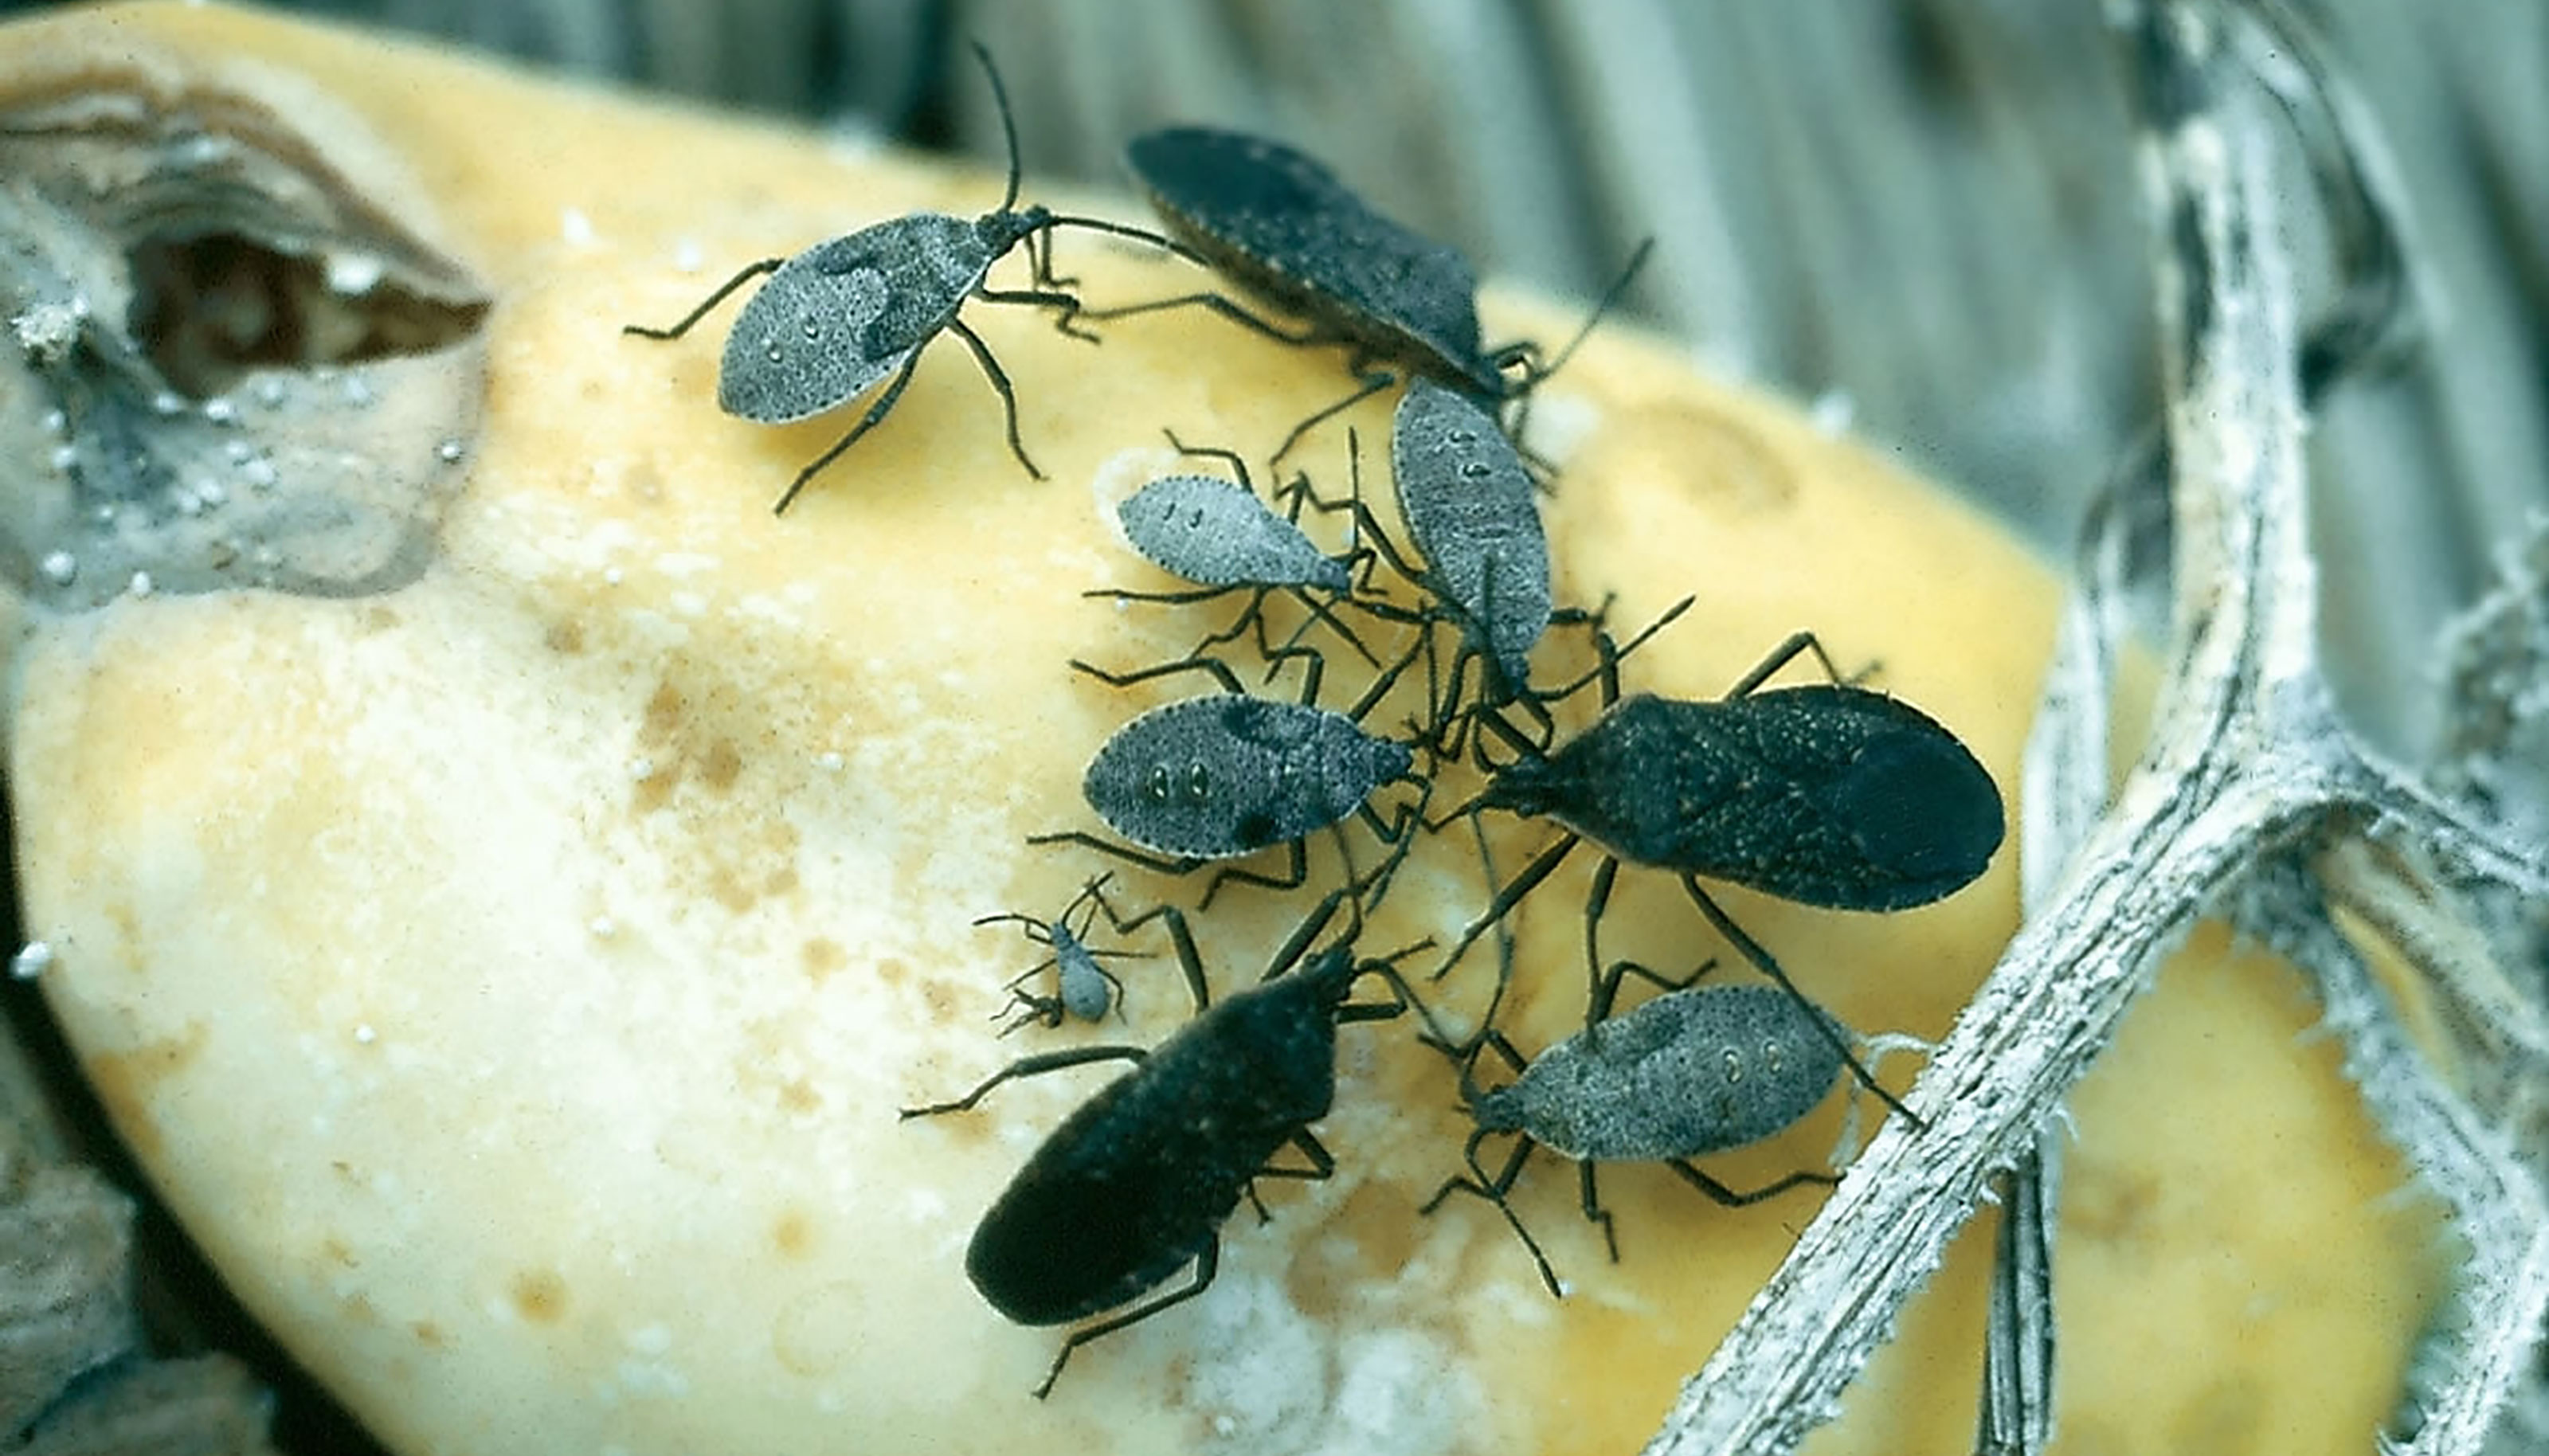 Black and grey bugs of different sizes feeding on a yellow squash.